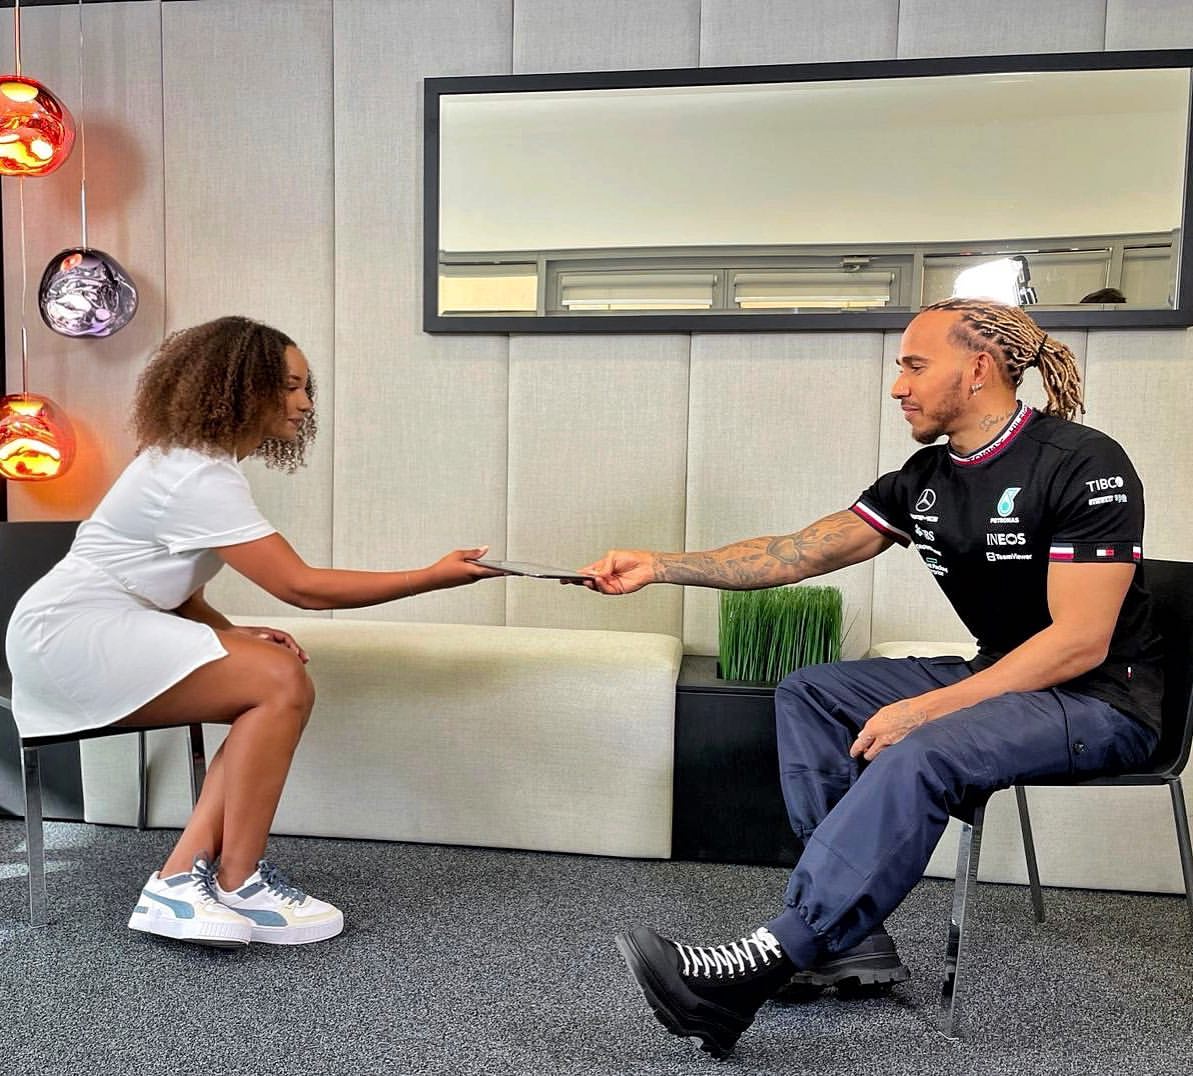 Rwandan Formula One commentator, Naomi Schiff (L), had an interview with F1 icon Lewis Hamilton before the start of the new season in March. Net photo.